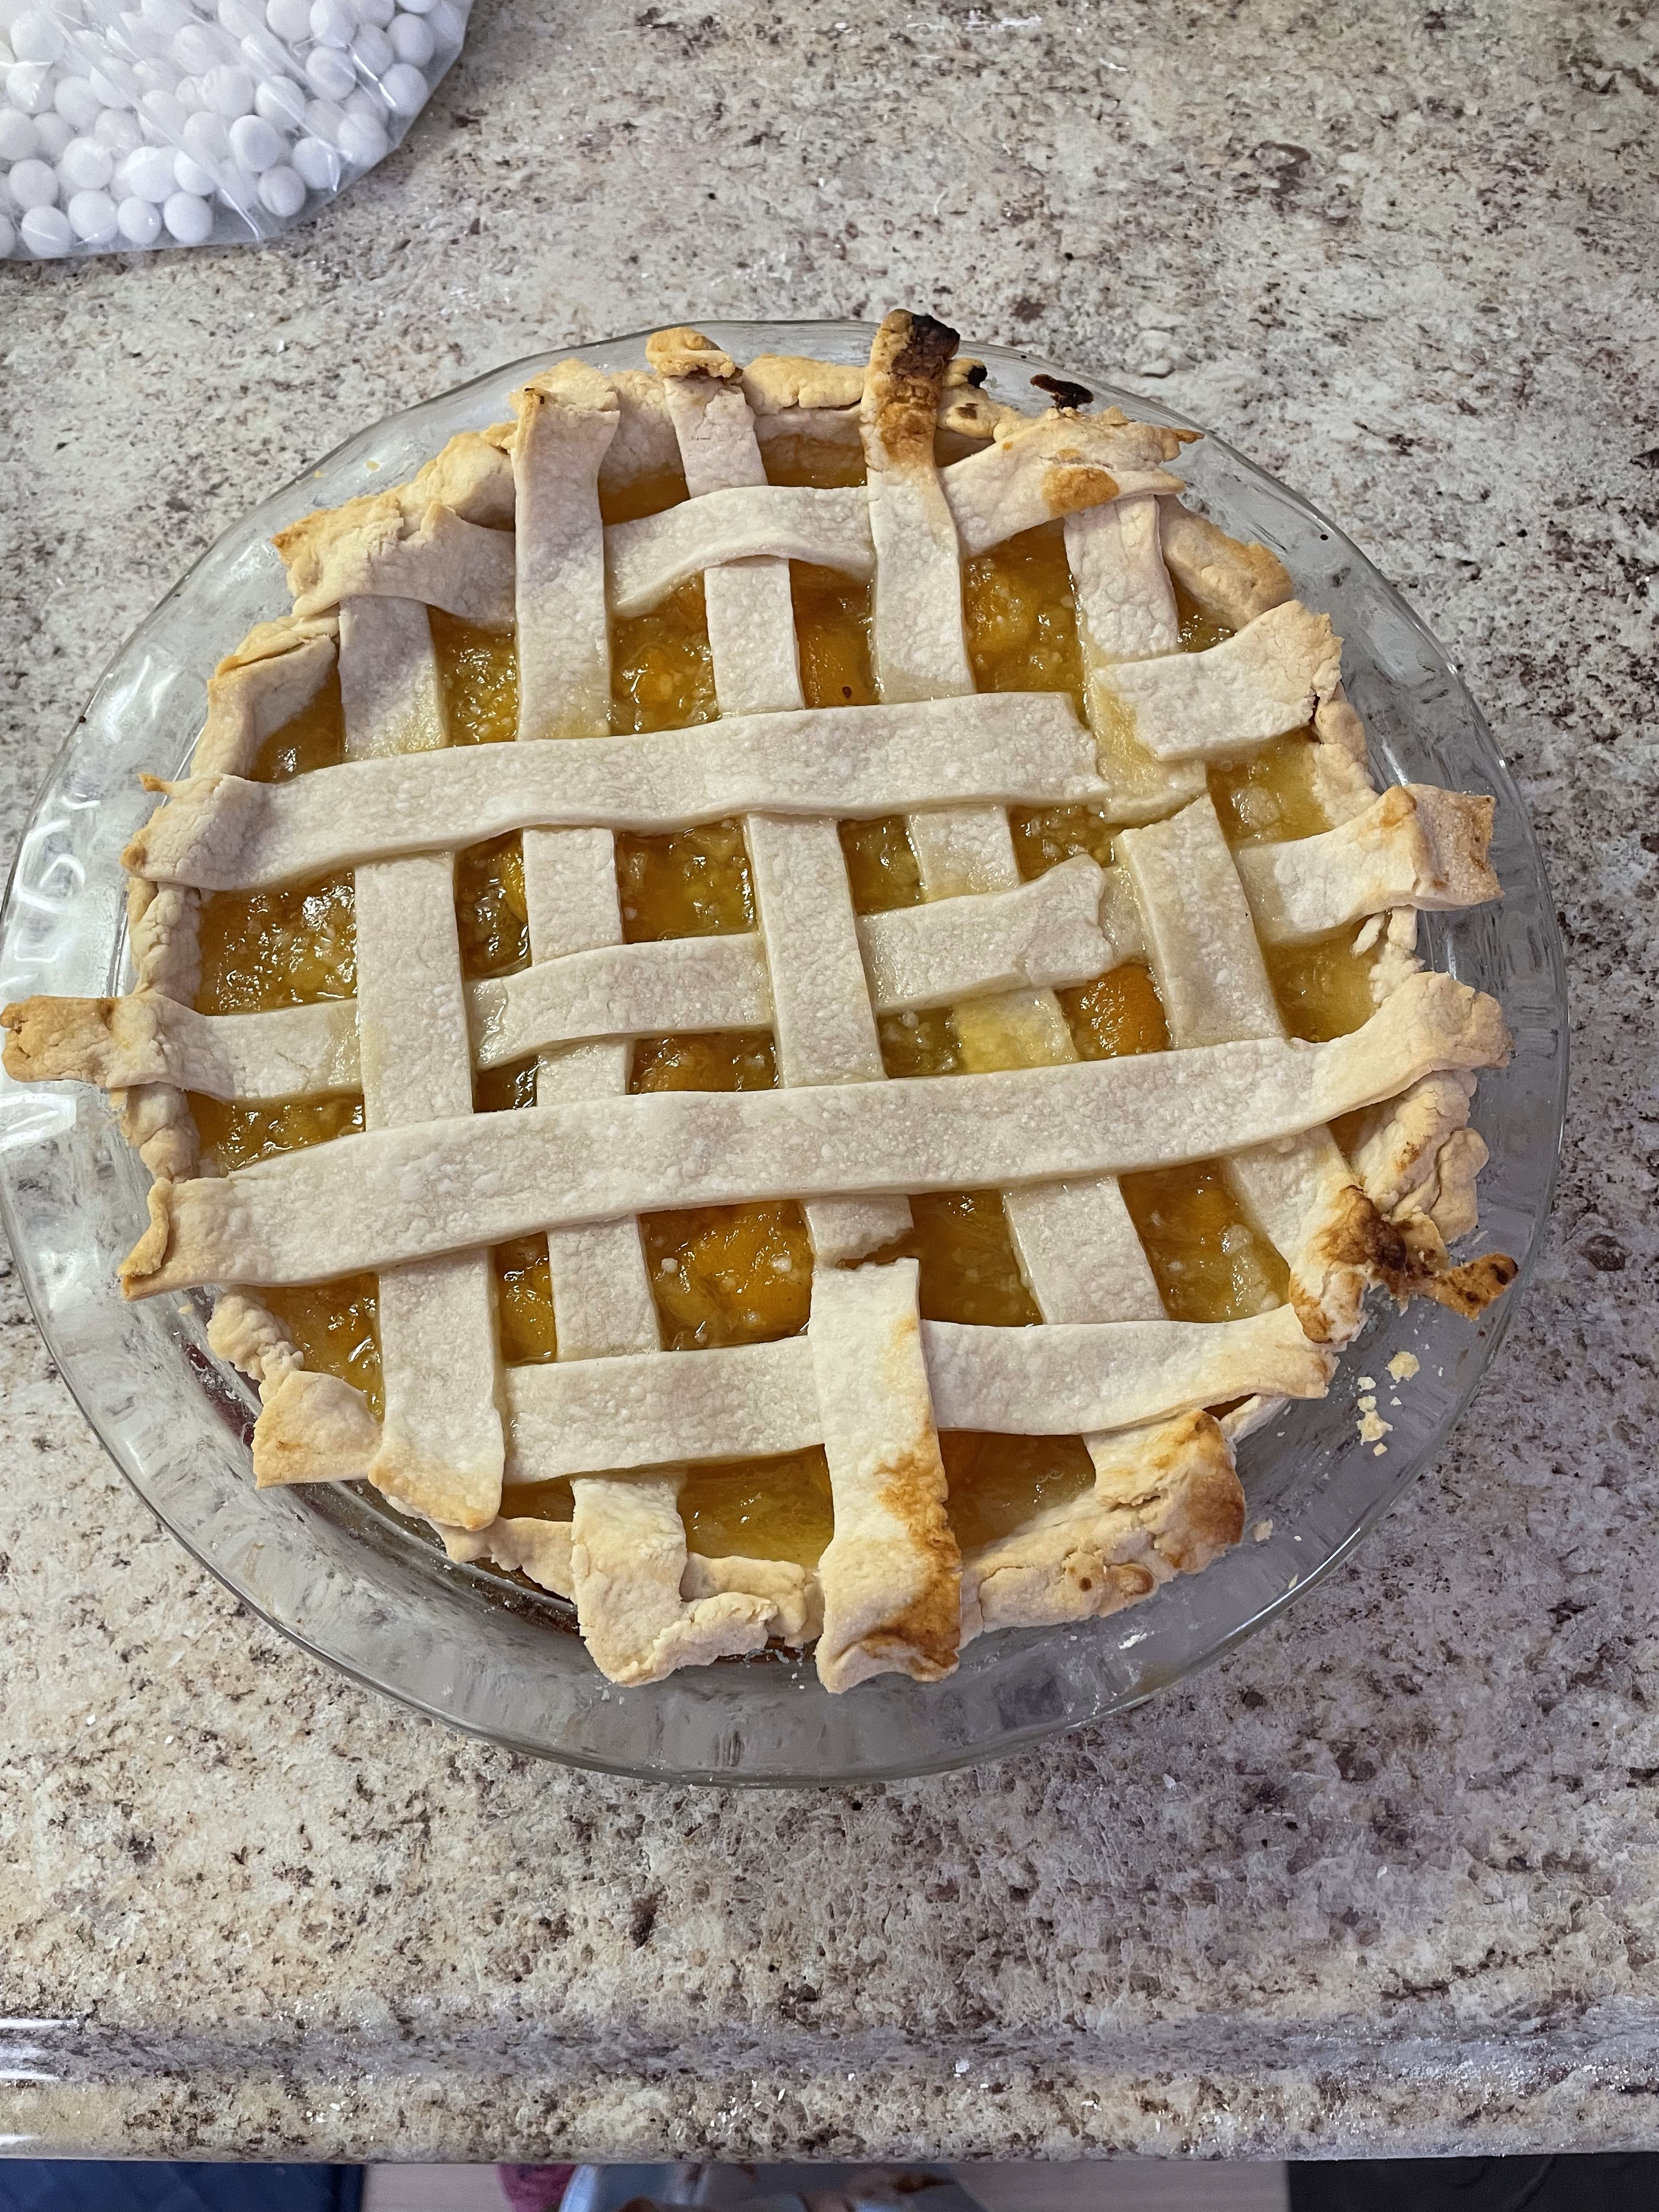 A completed Crisscross Apricot Pie